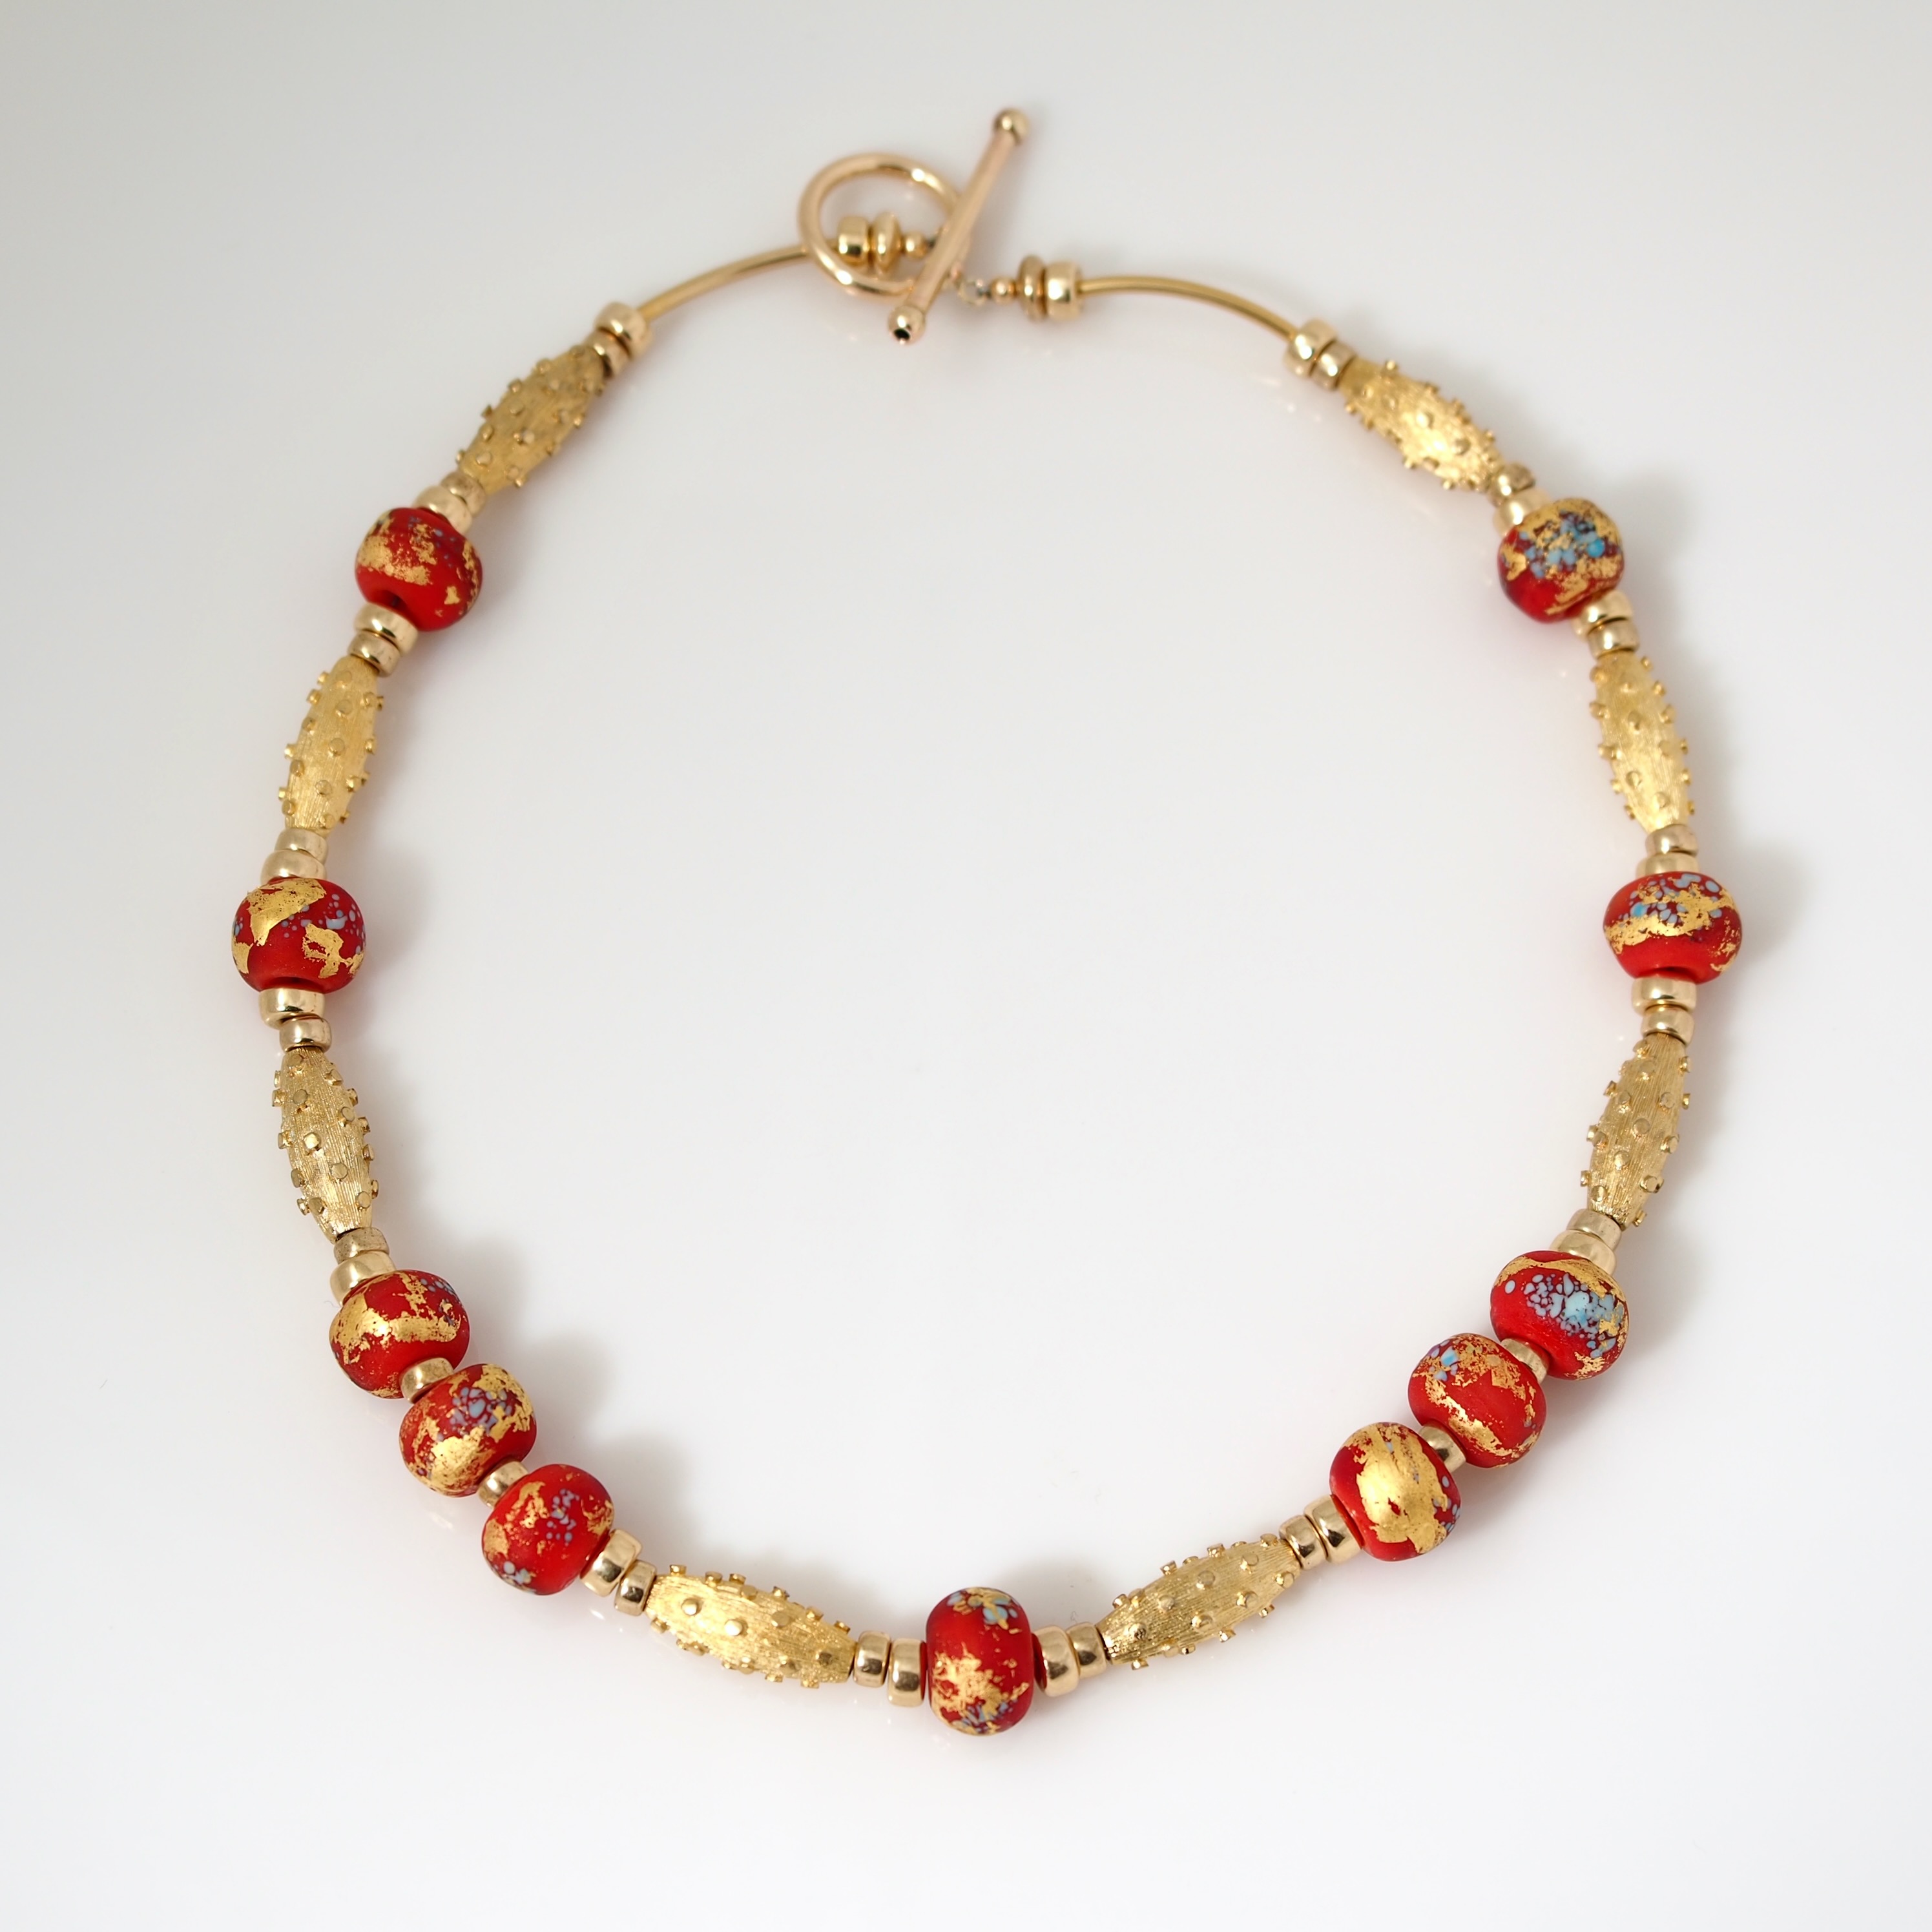 Crimson and Gold, Gold-Filled Beads and Handblown Red and Gold Lampwork Bead Necklace, 14 kt. Gold Clasp